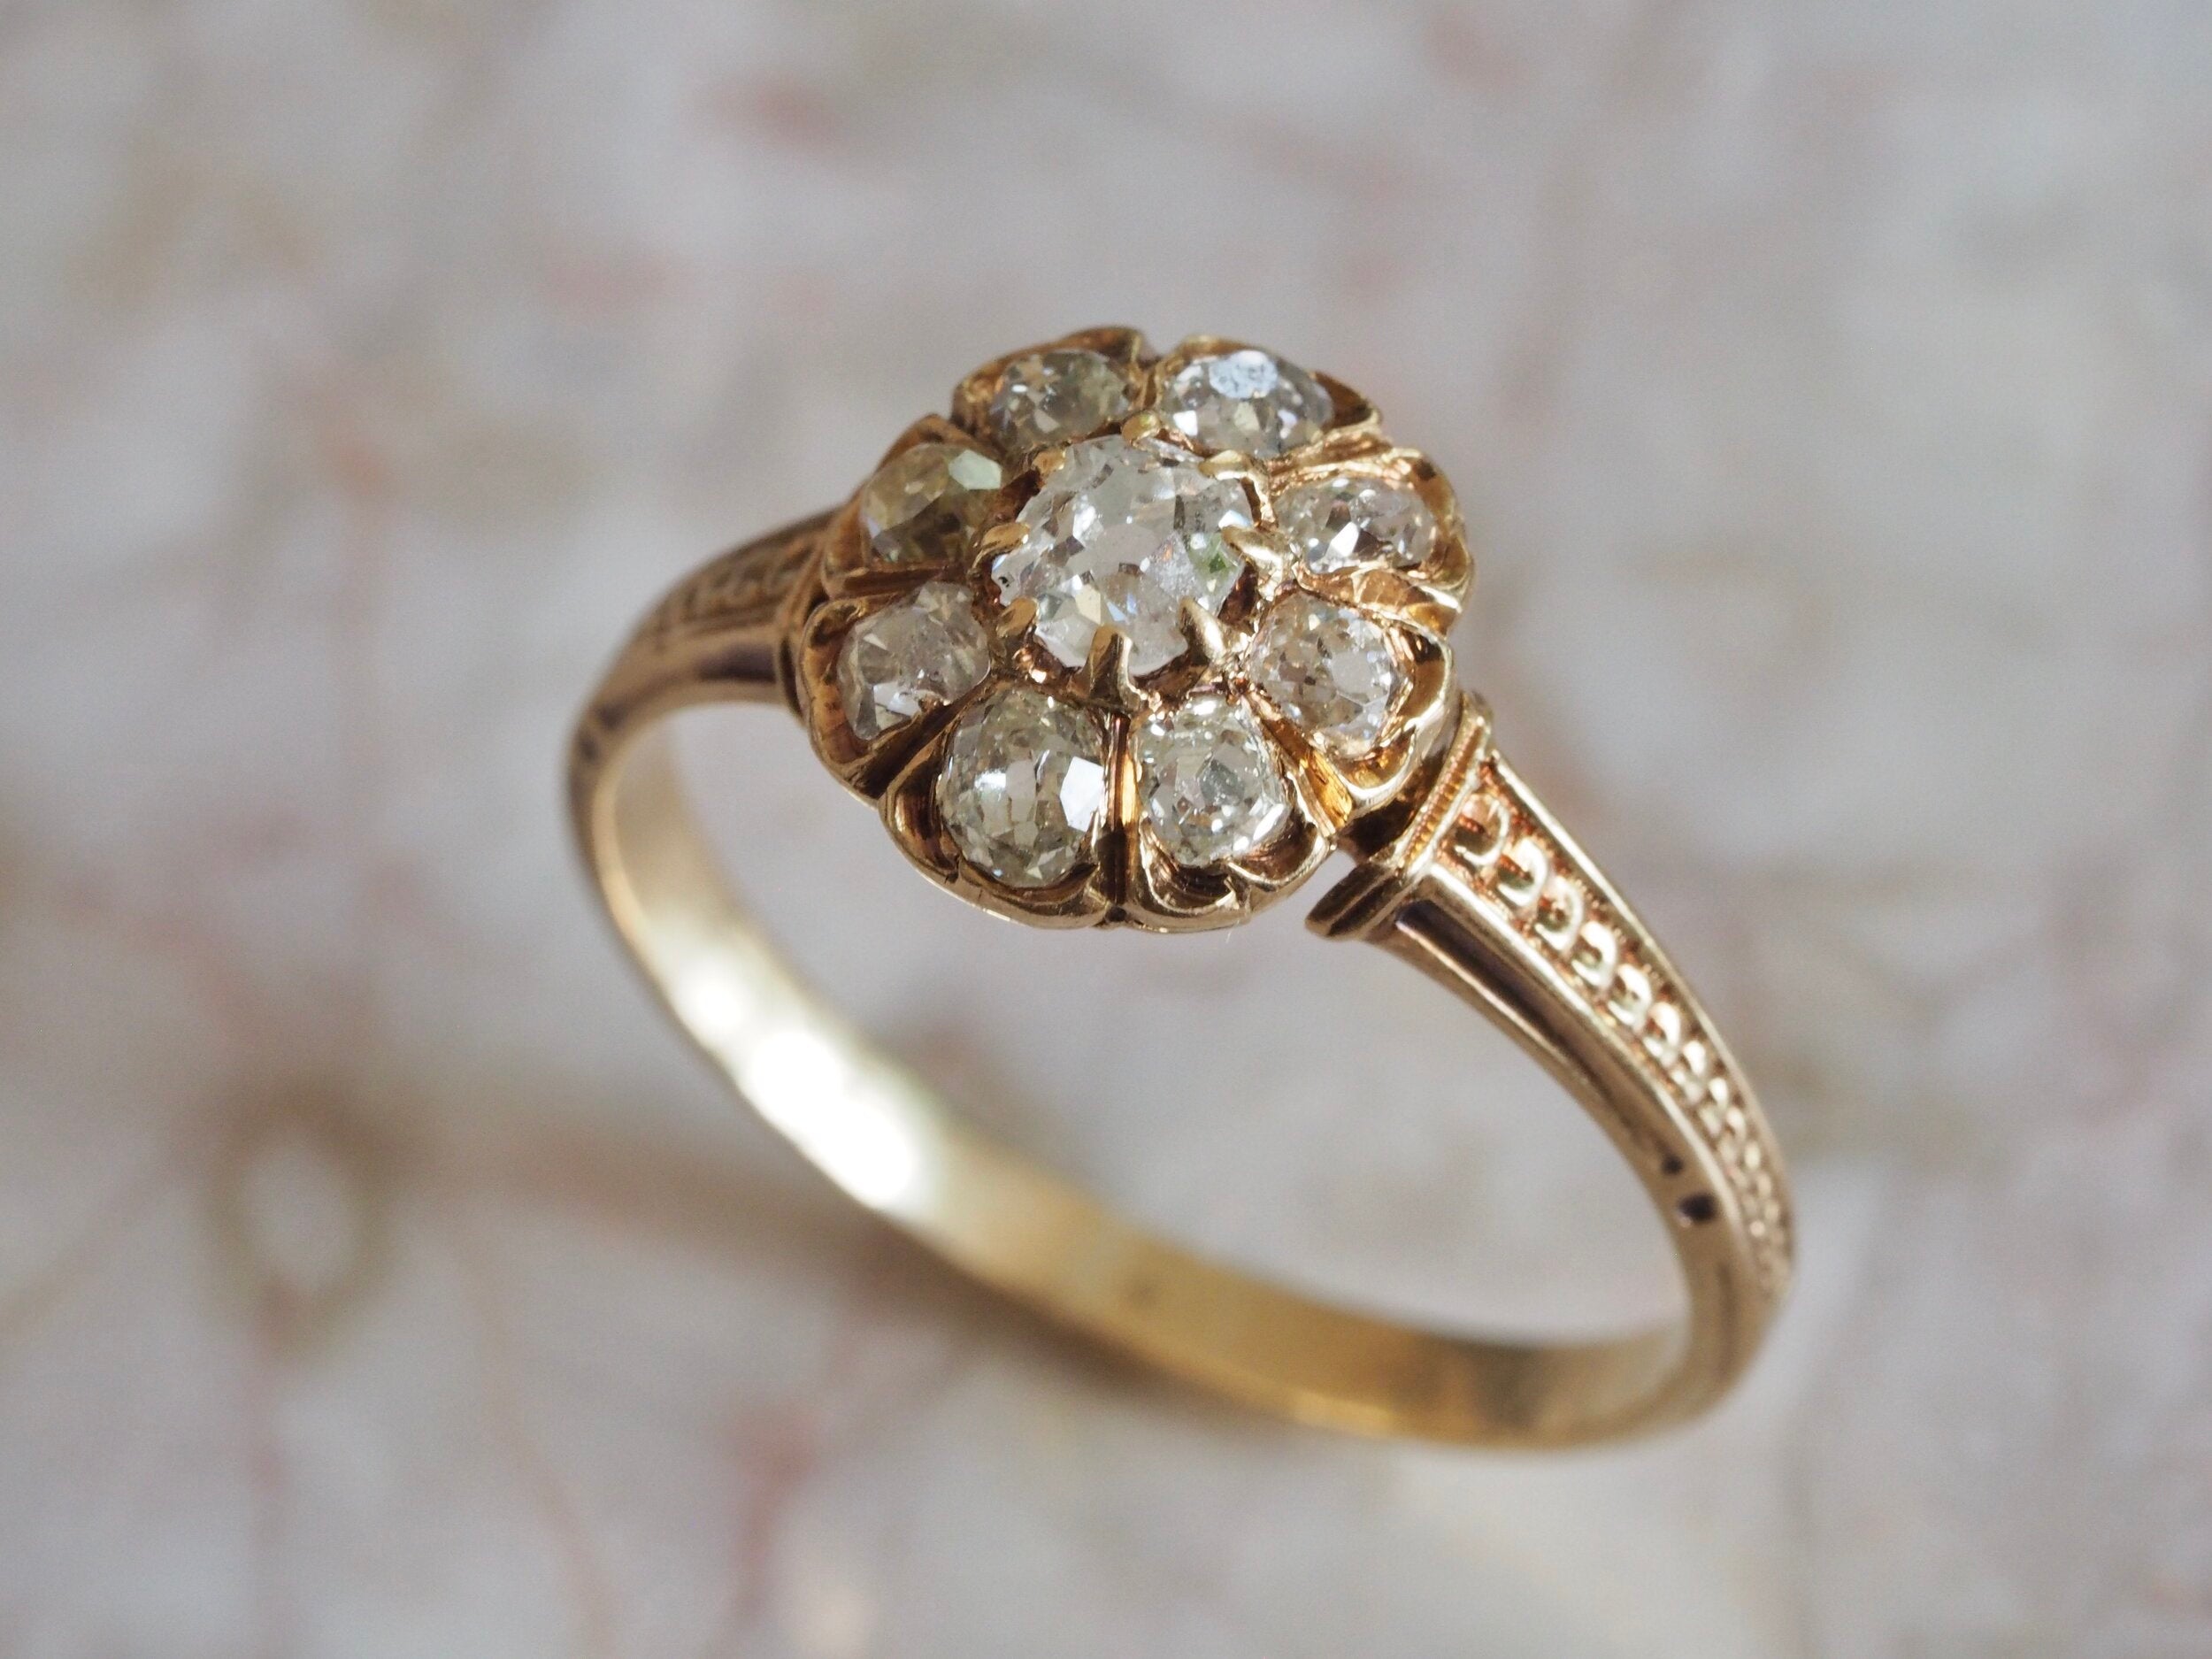 Antique Victorian French 18k Gold Old European Cut Diamond Ring